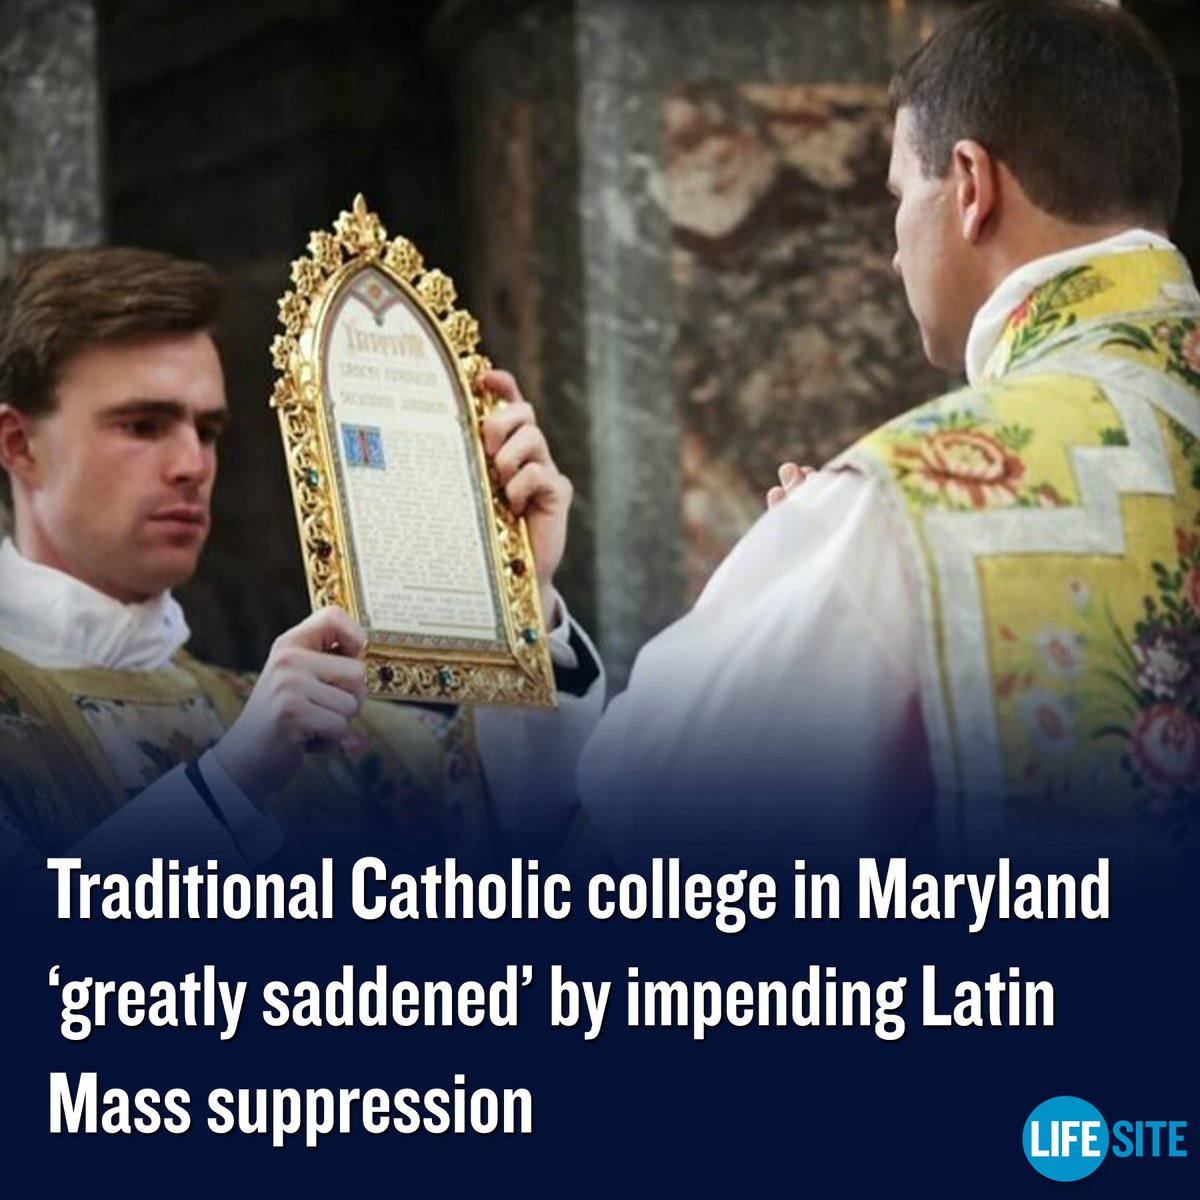 A Catholic college in Maryland has issued a statement following the announcement that its local Traditional Latin Mass will be suppressed: ‘We are greatly saddened by this action.’

MORE: lifesitenews.com/news/tradition…

#CatholicTwitter #CatholicChurch #Catholic #LatinMass